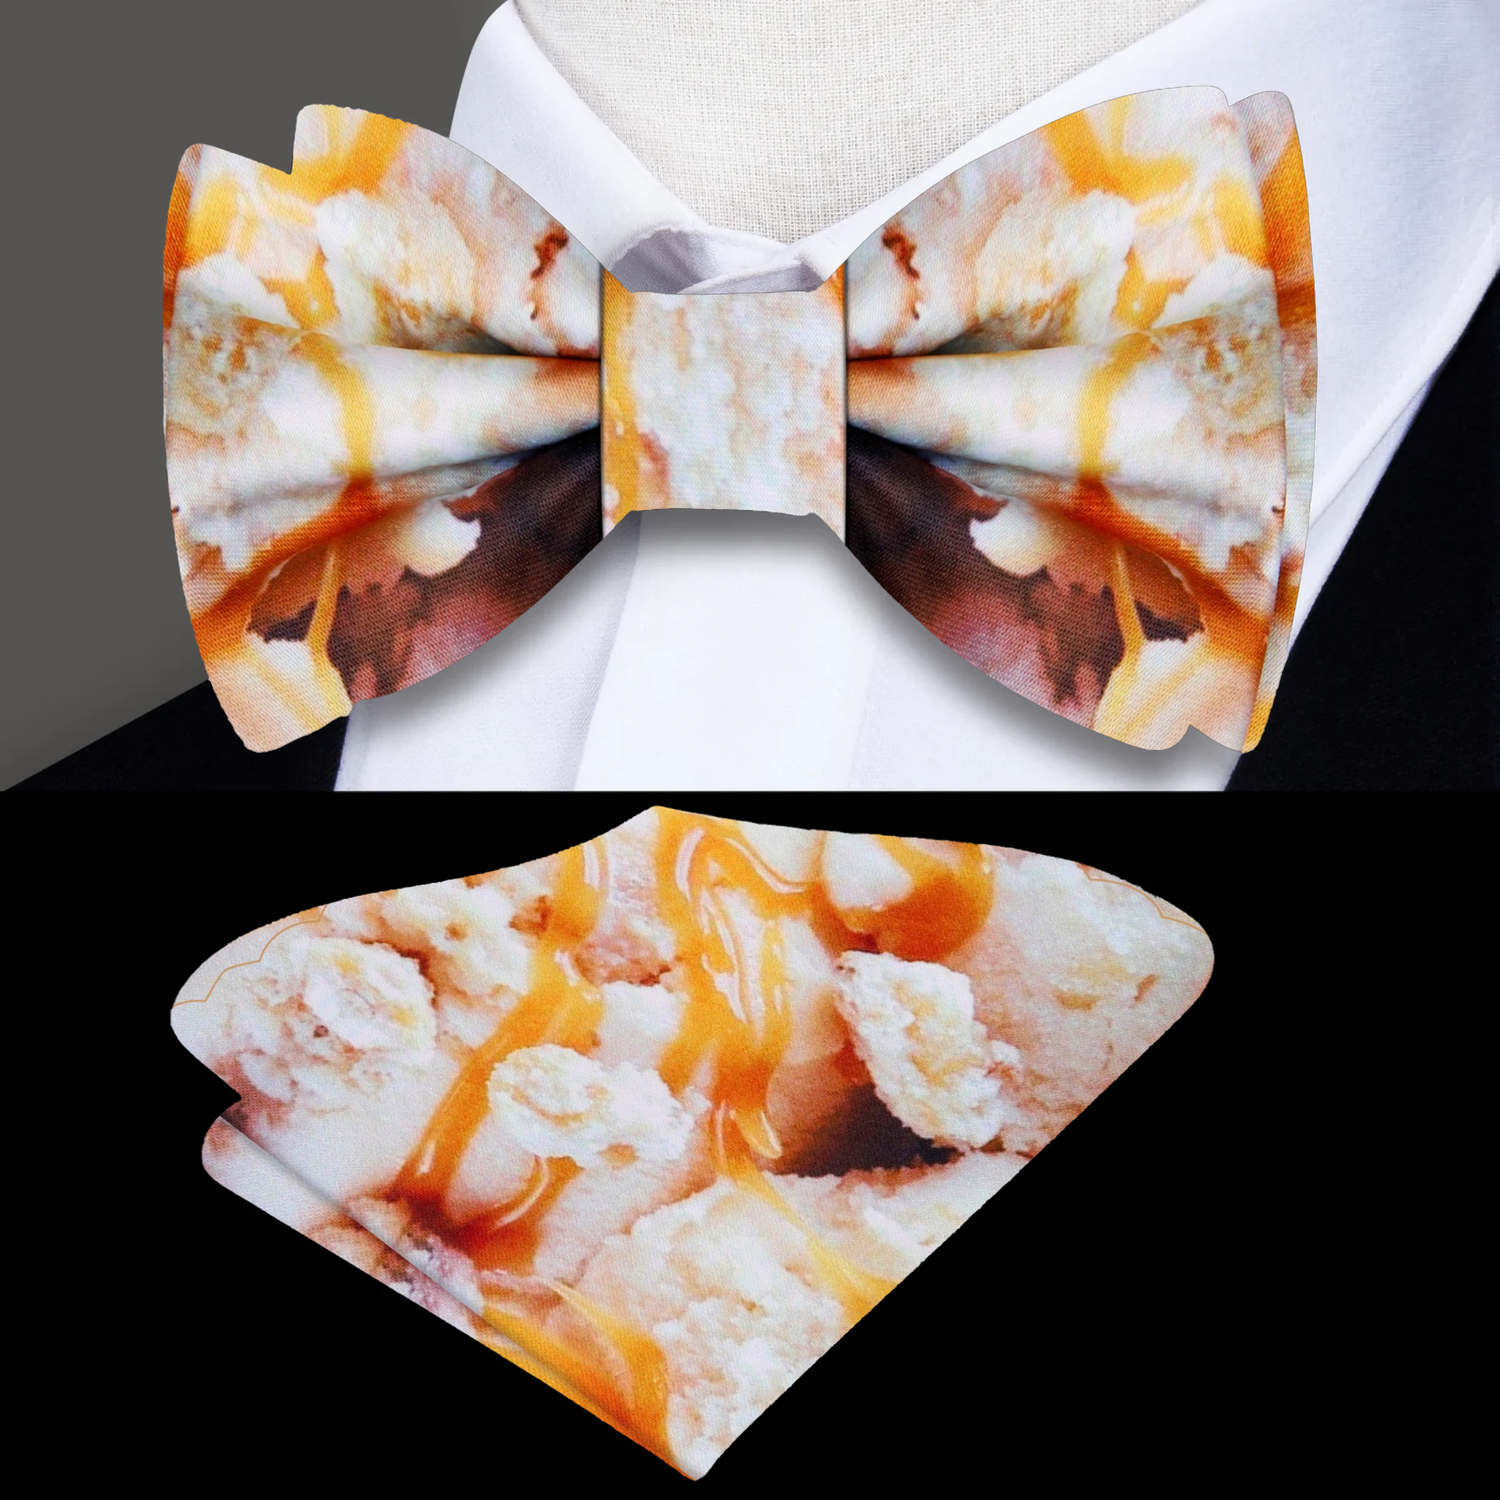 Vanilla Ice Cream With Salted Caramel Drizzle Bow Tie, Matching Pocket Square